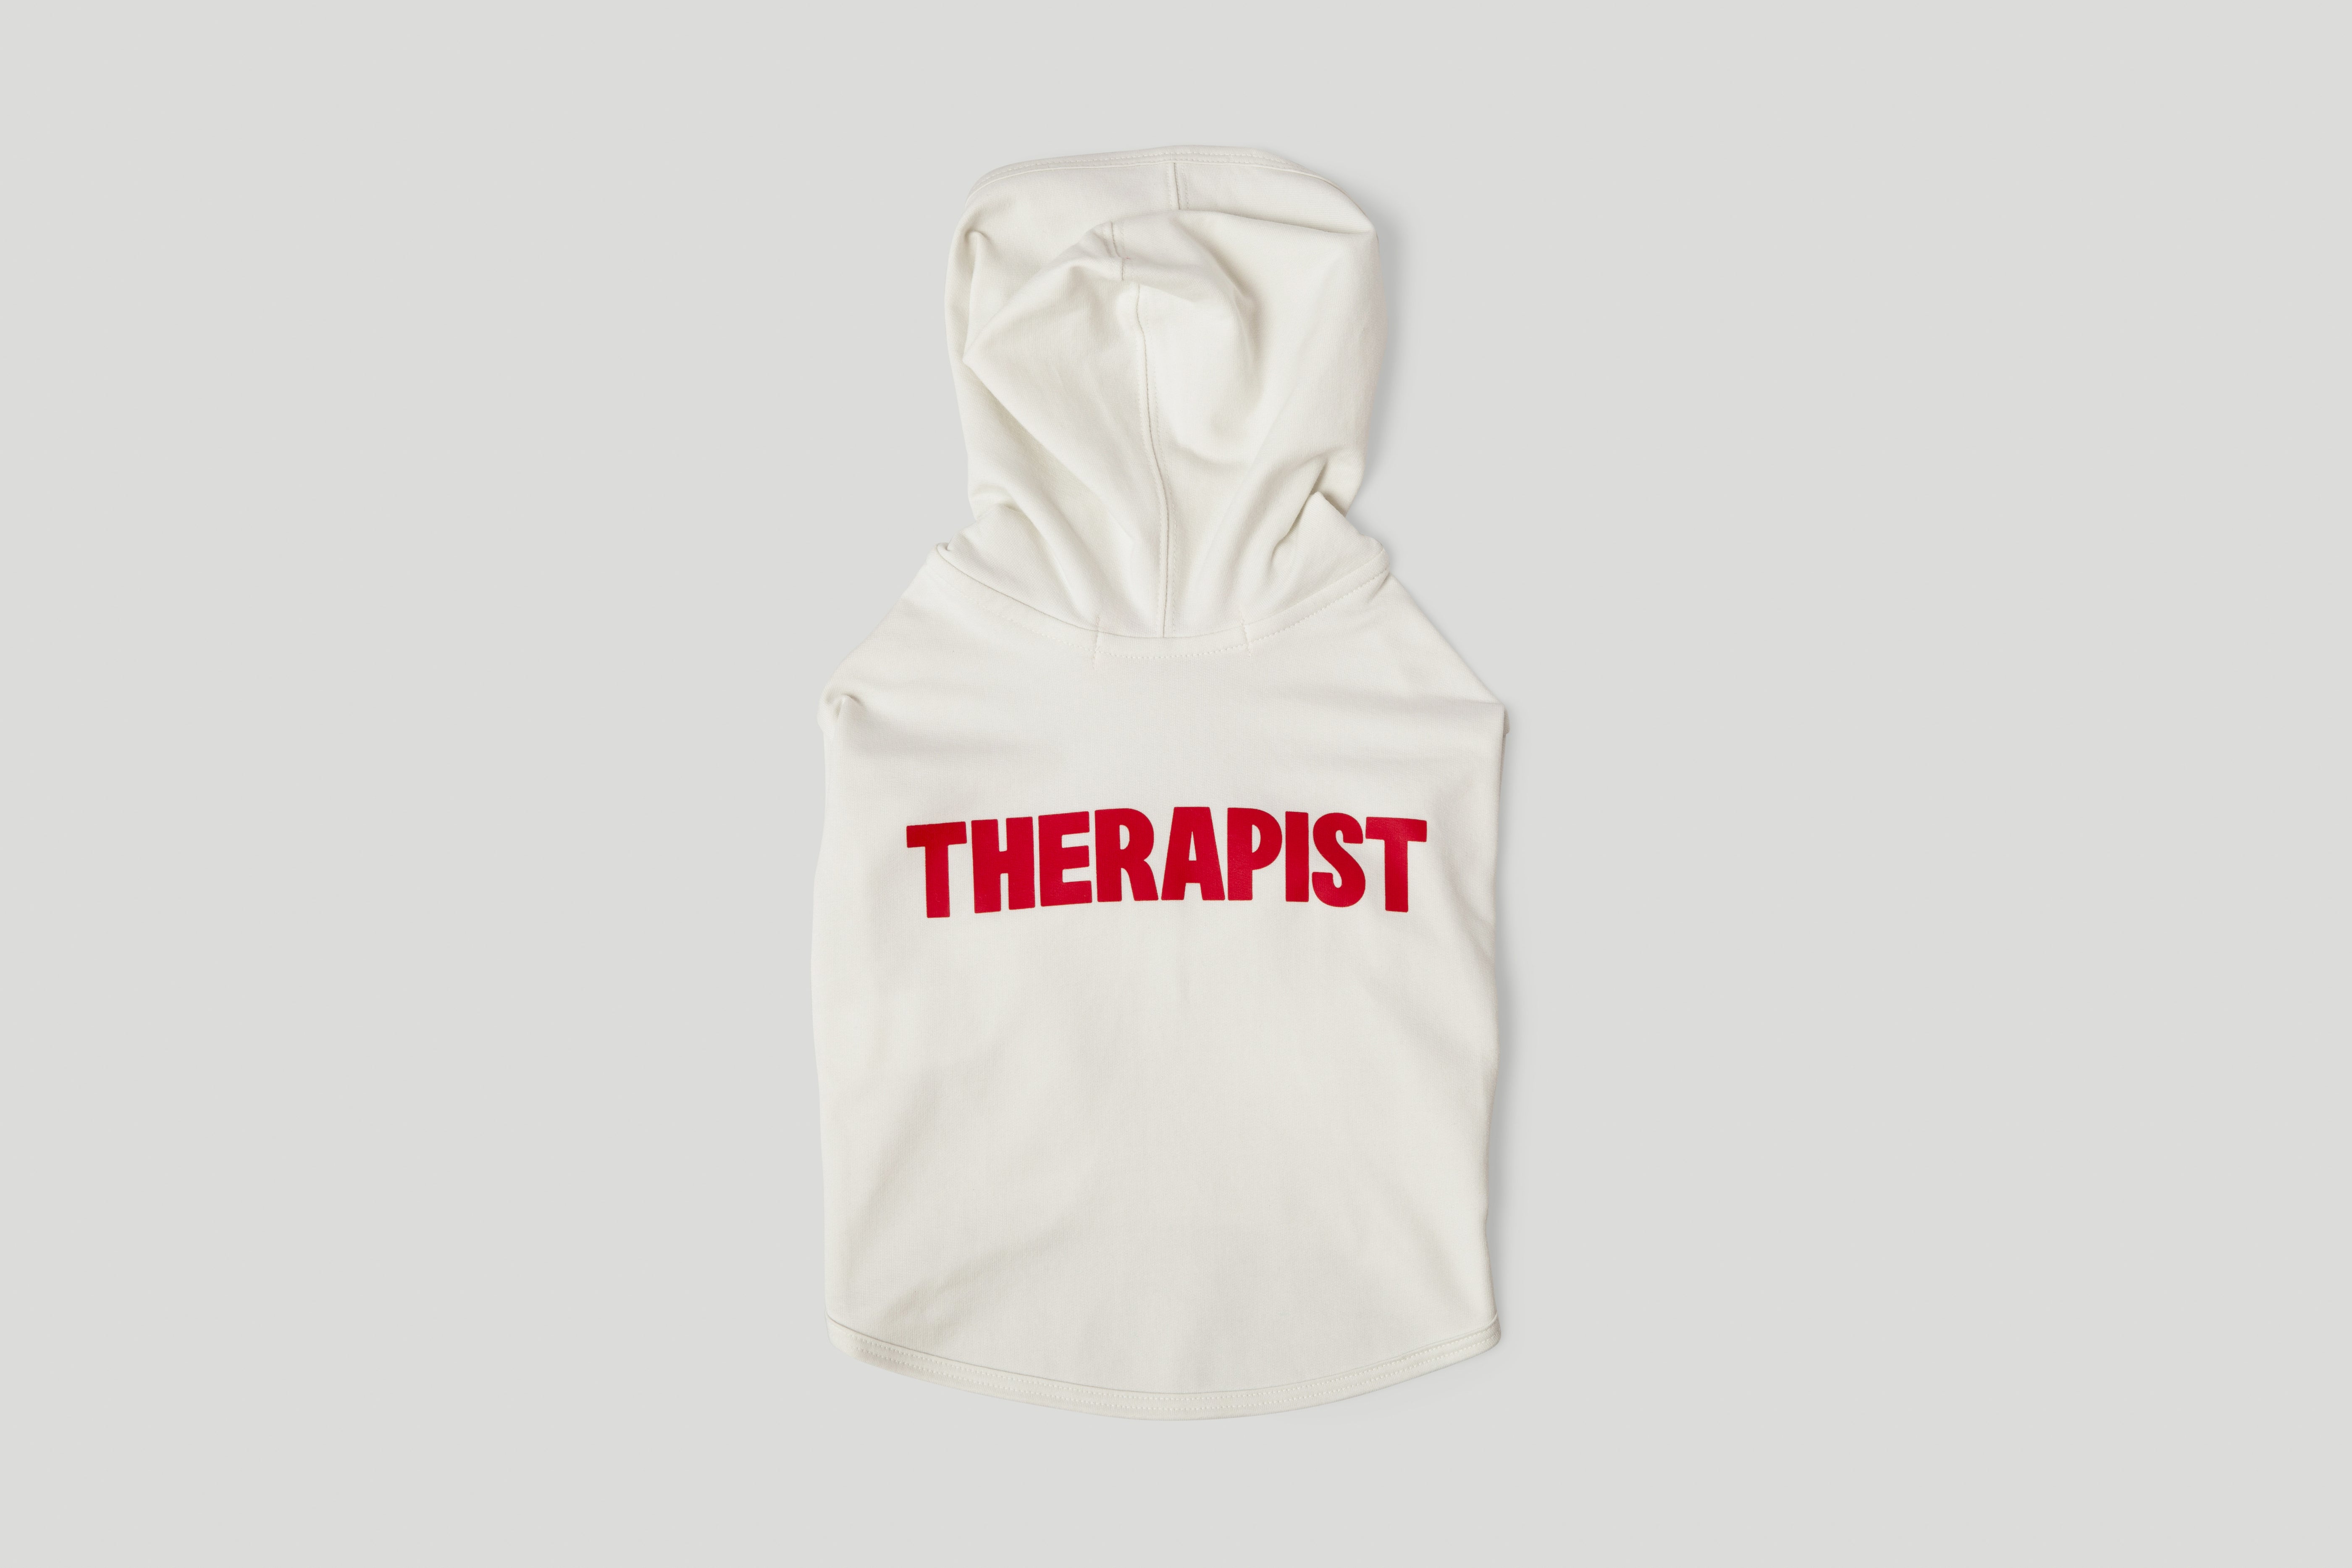 Therapist Doggy Hoodie